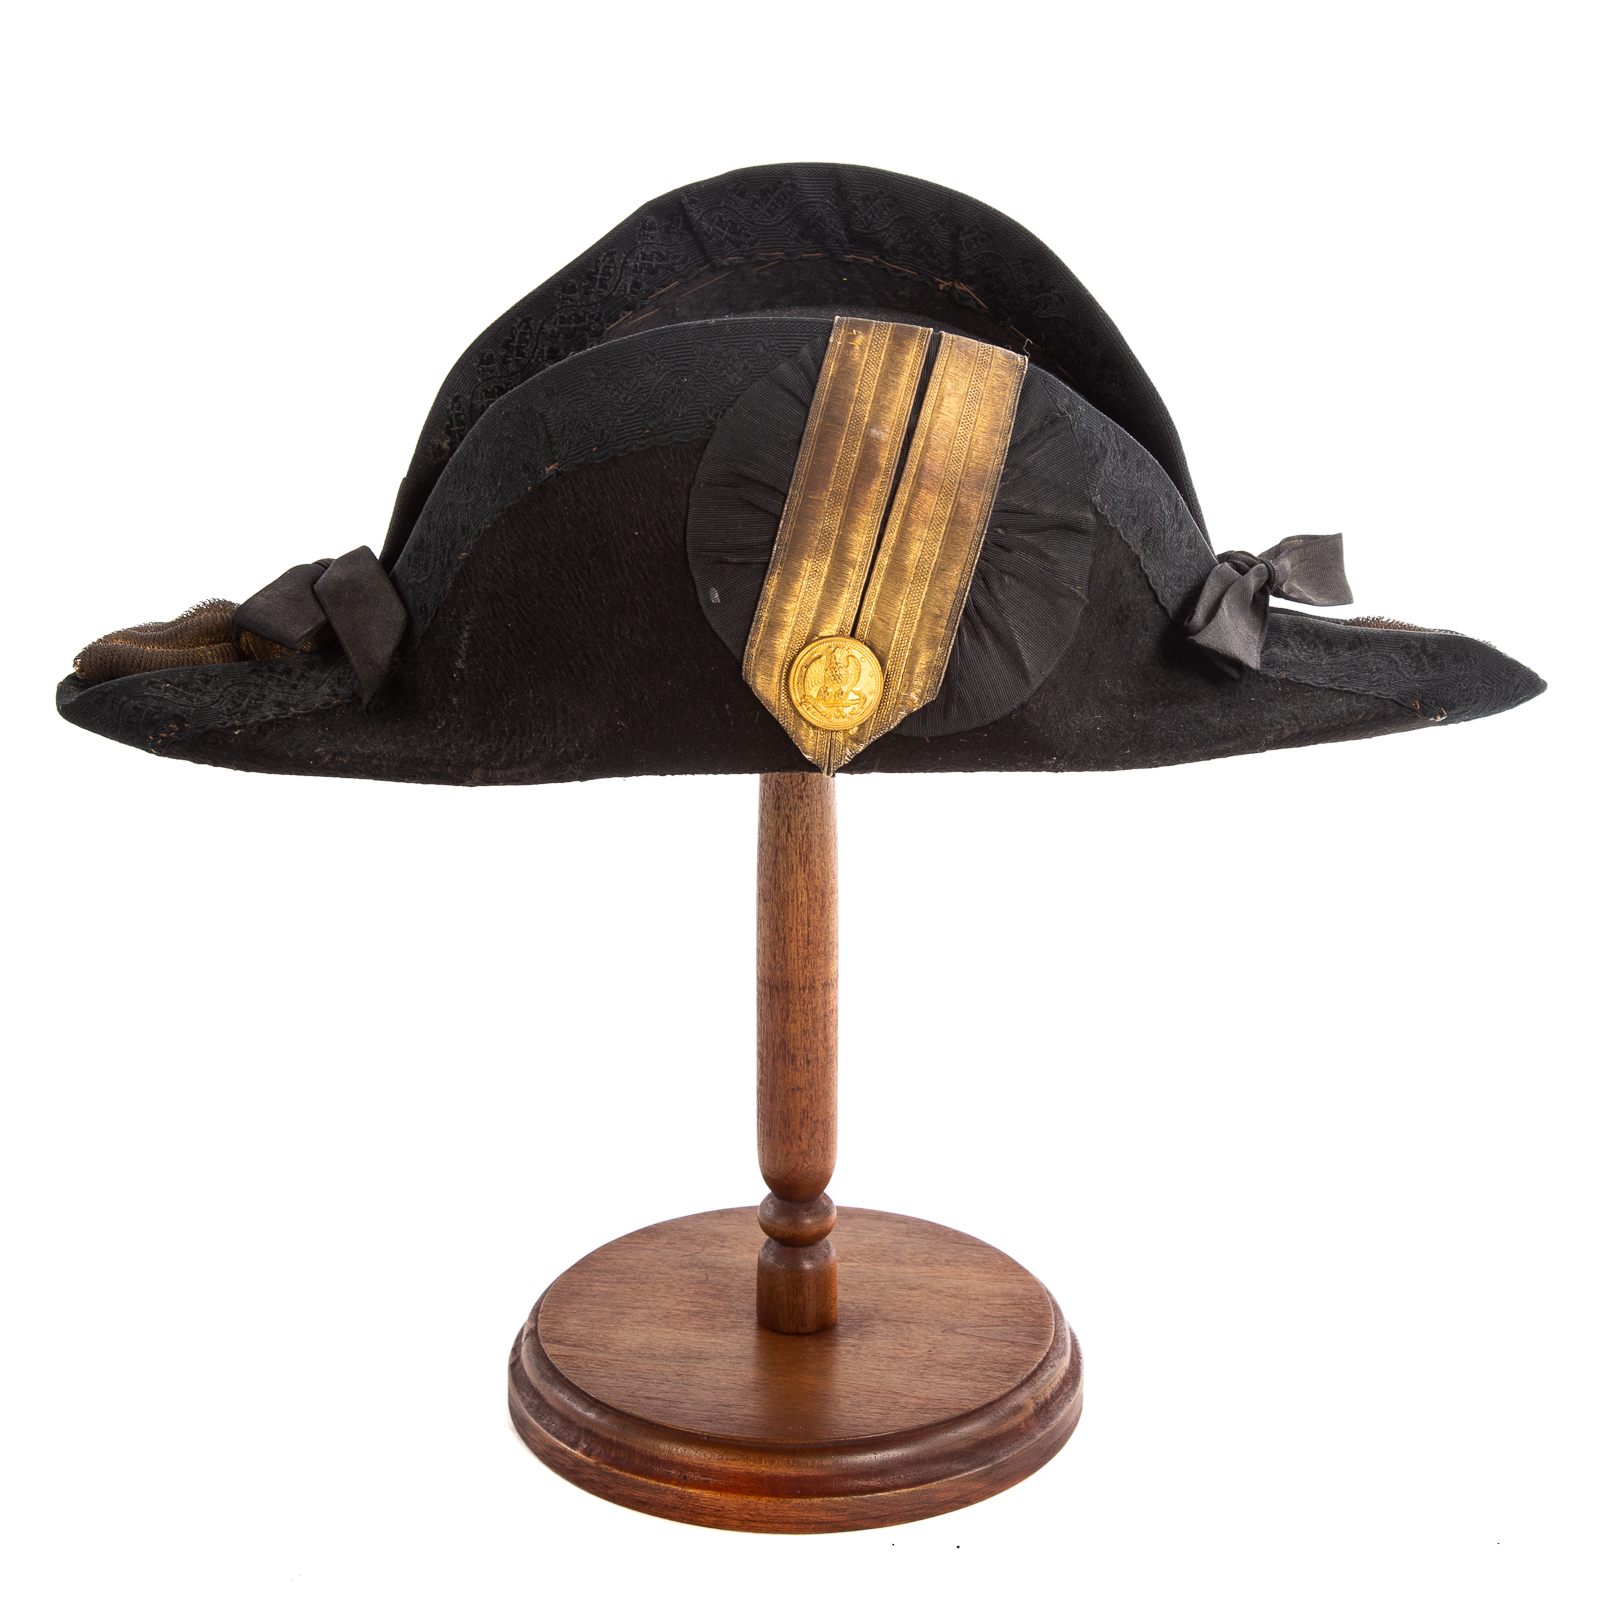 AMERICAN NAVAL OFFICER'S CHAPEAU